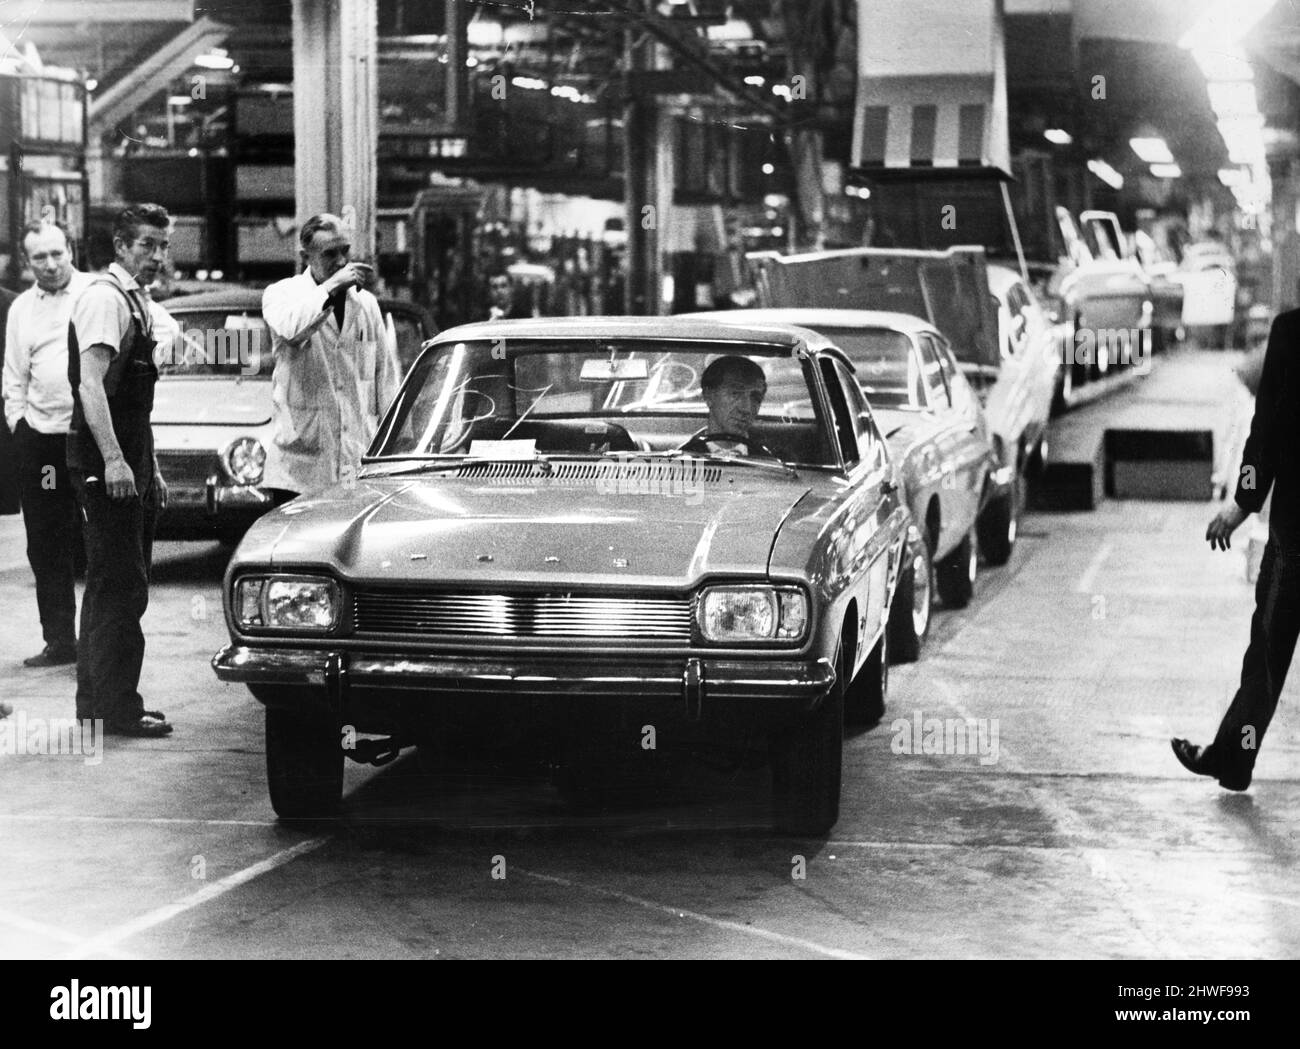 A new Ford Capri car rolls off the production line at the Ford Motor plant in Halewood, Merseyside. January 1969. Stock Photo